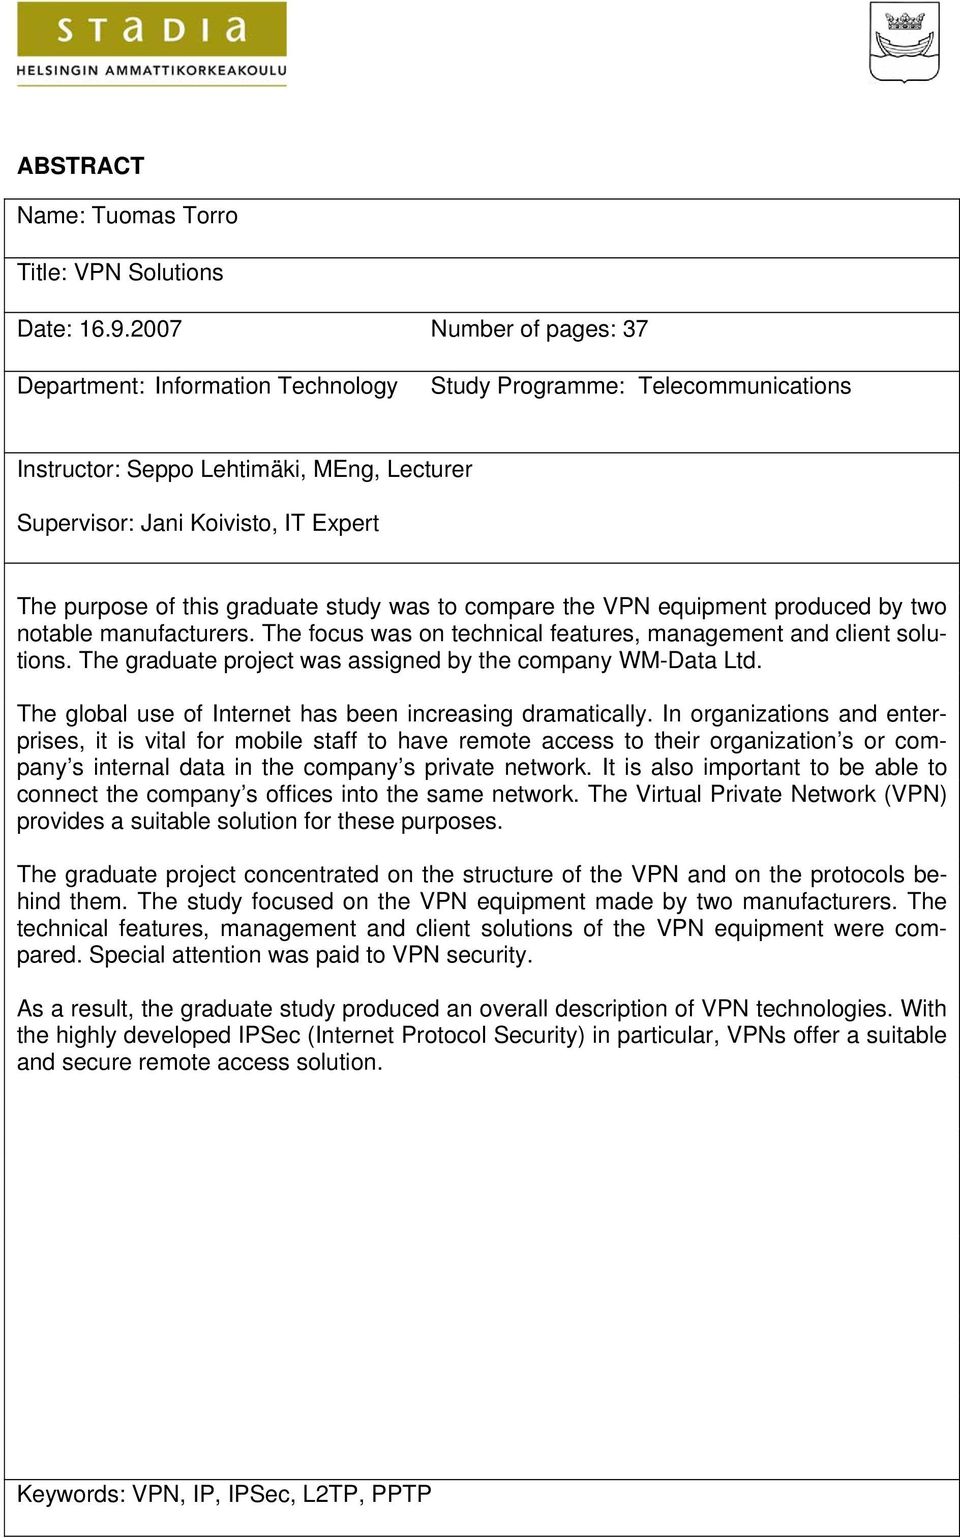 graduate study was to compare the VPN equipment produced by two notable manufacturers. The focus was on technical features, management and client solutions.